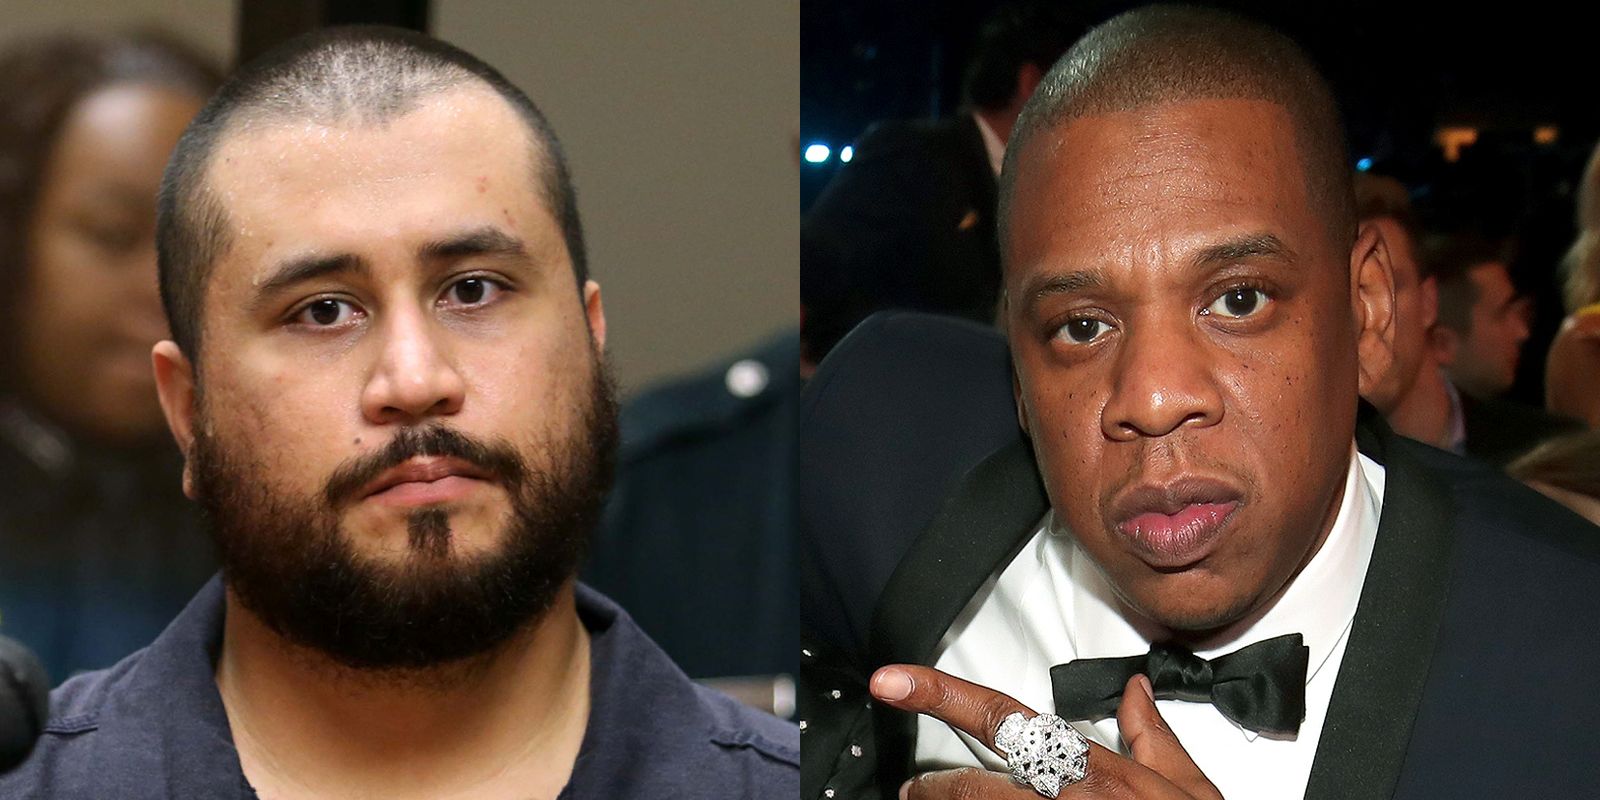 George Zimmerman Threatens To Kill Jay Z And Feed Him To Alligators For Trayvon Martin ...1600 x 800